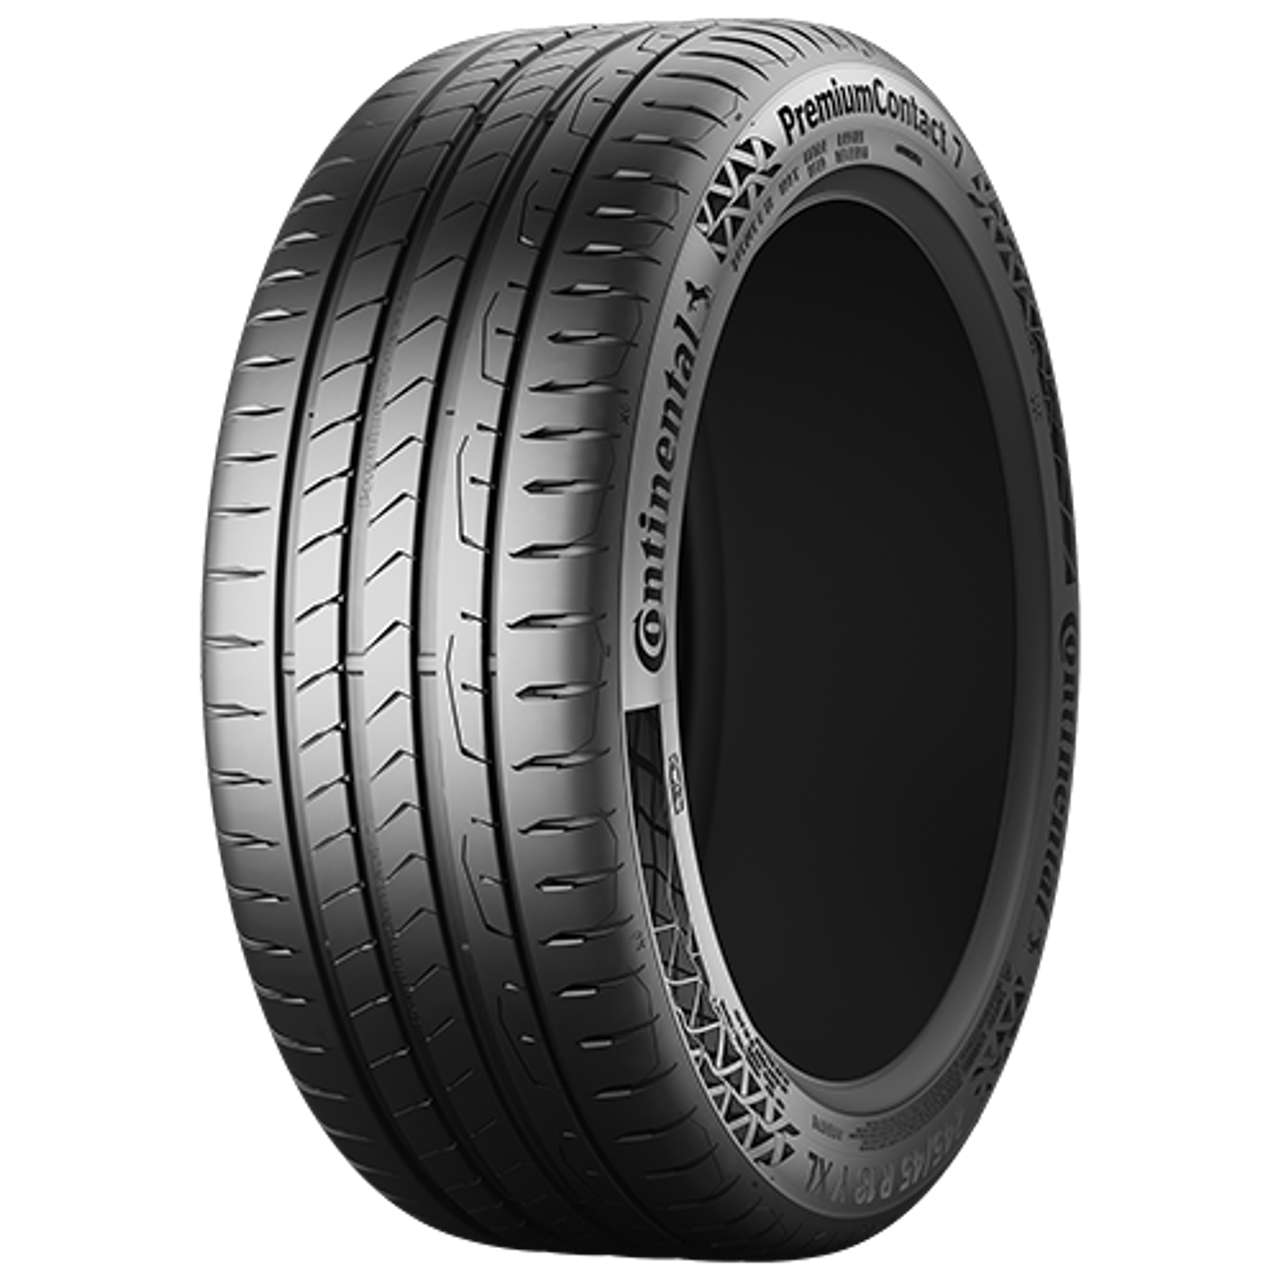 CONTINENTAL PREMIUMCONTACT 7 (EVc) 225/45R17 94V FR BSW